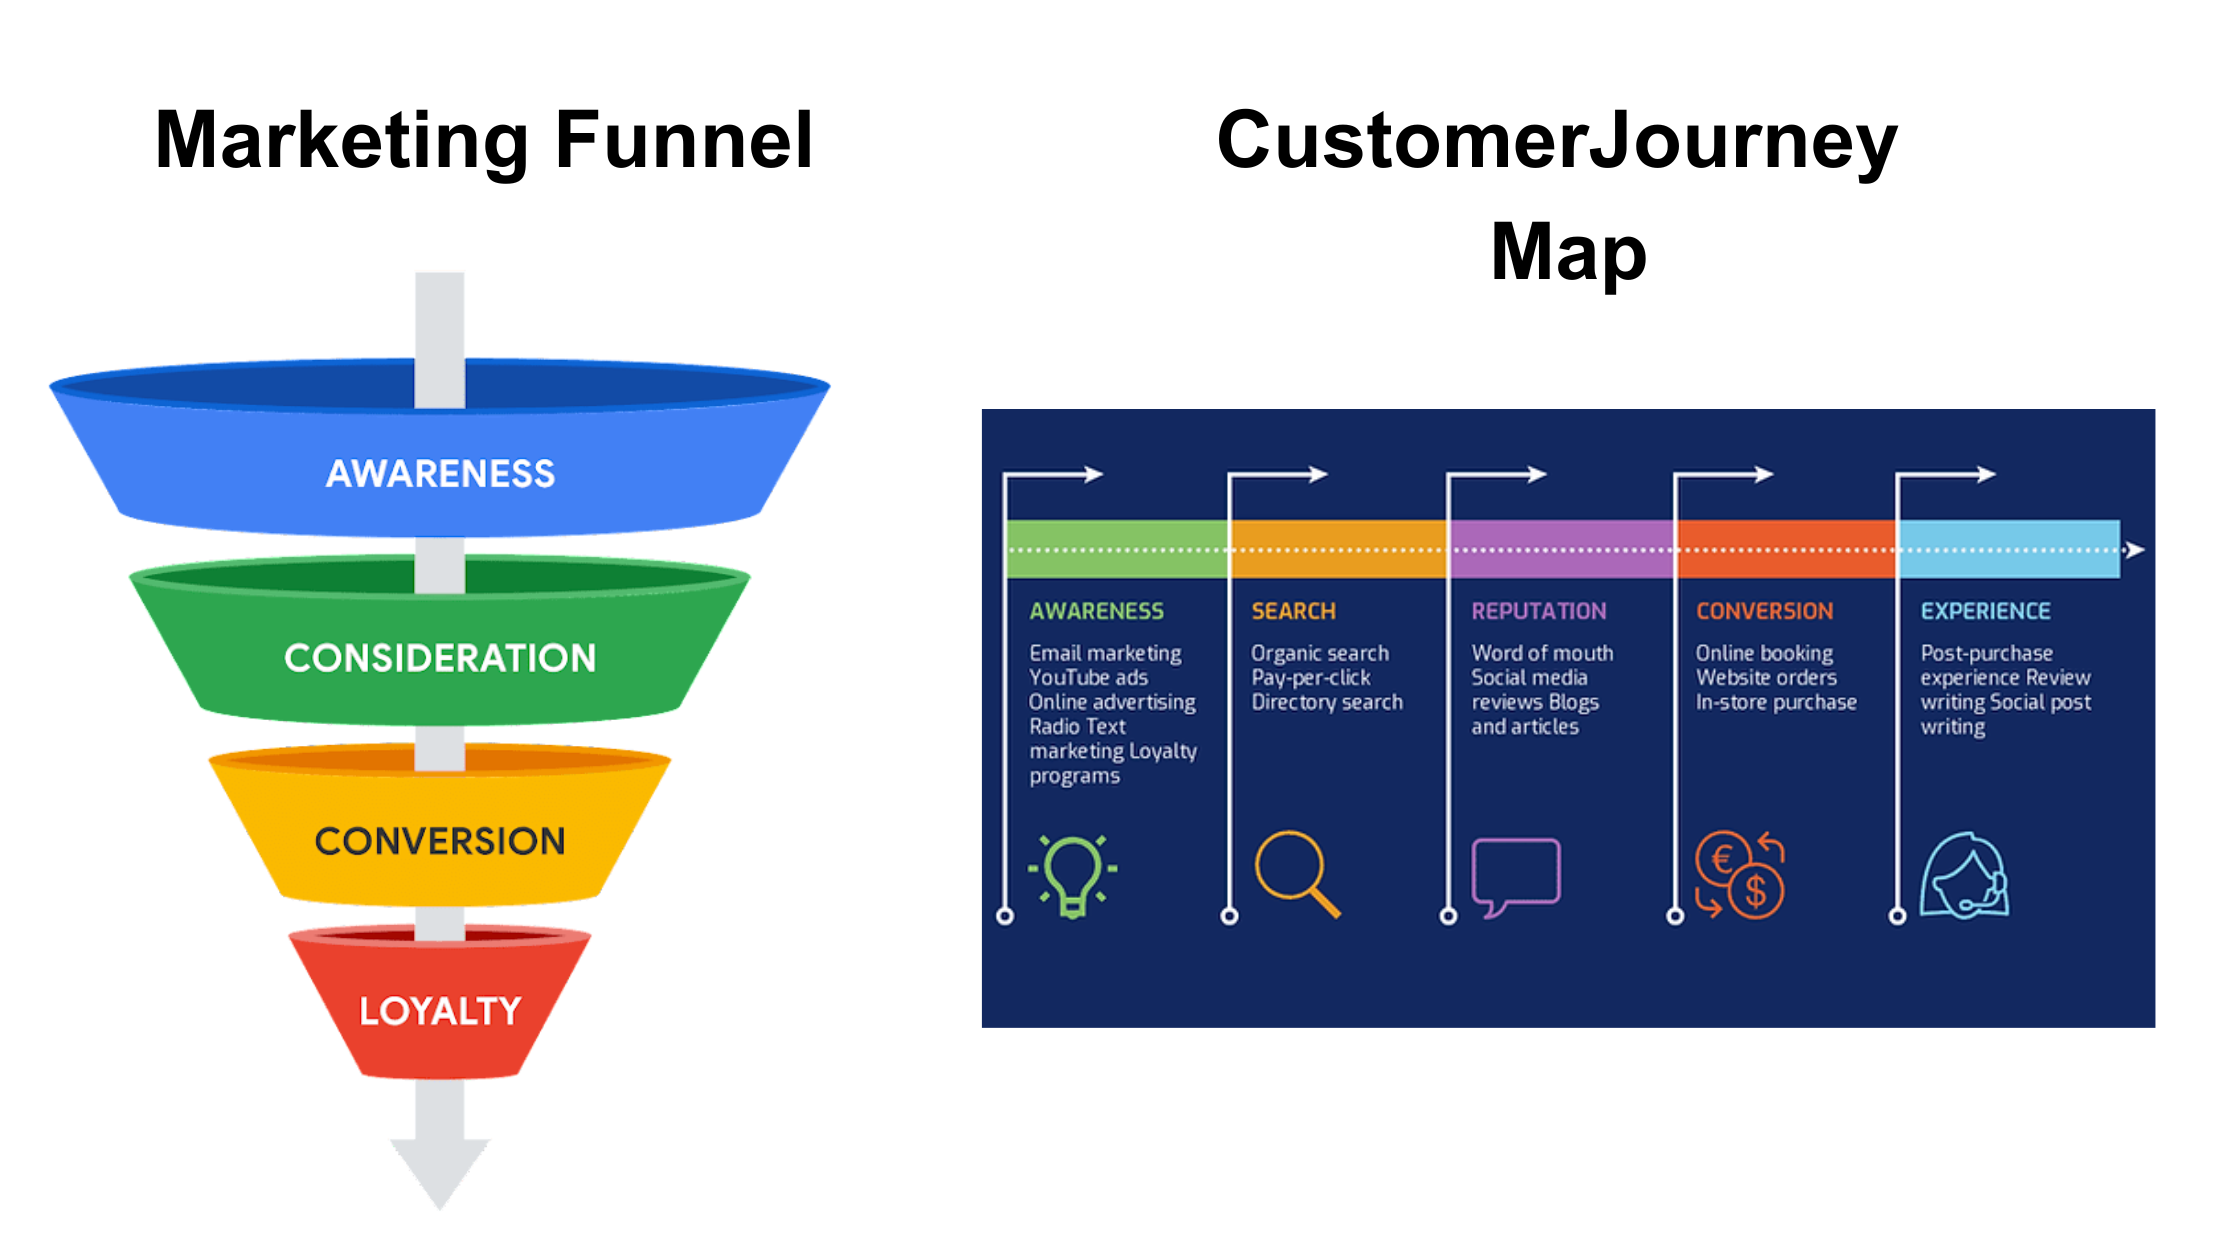 How does a Marketing Funnel differ from a Customer Journey Map?